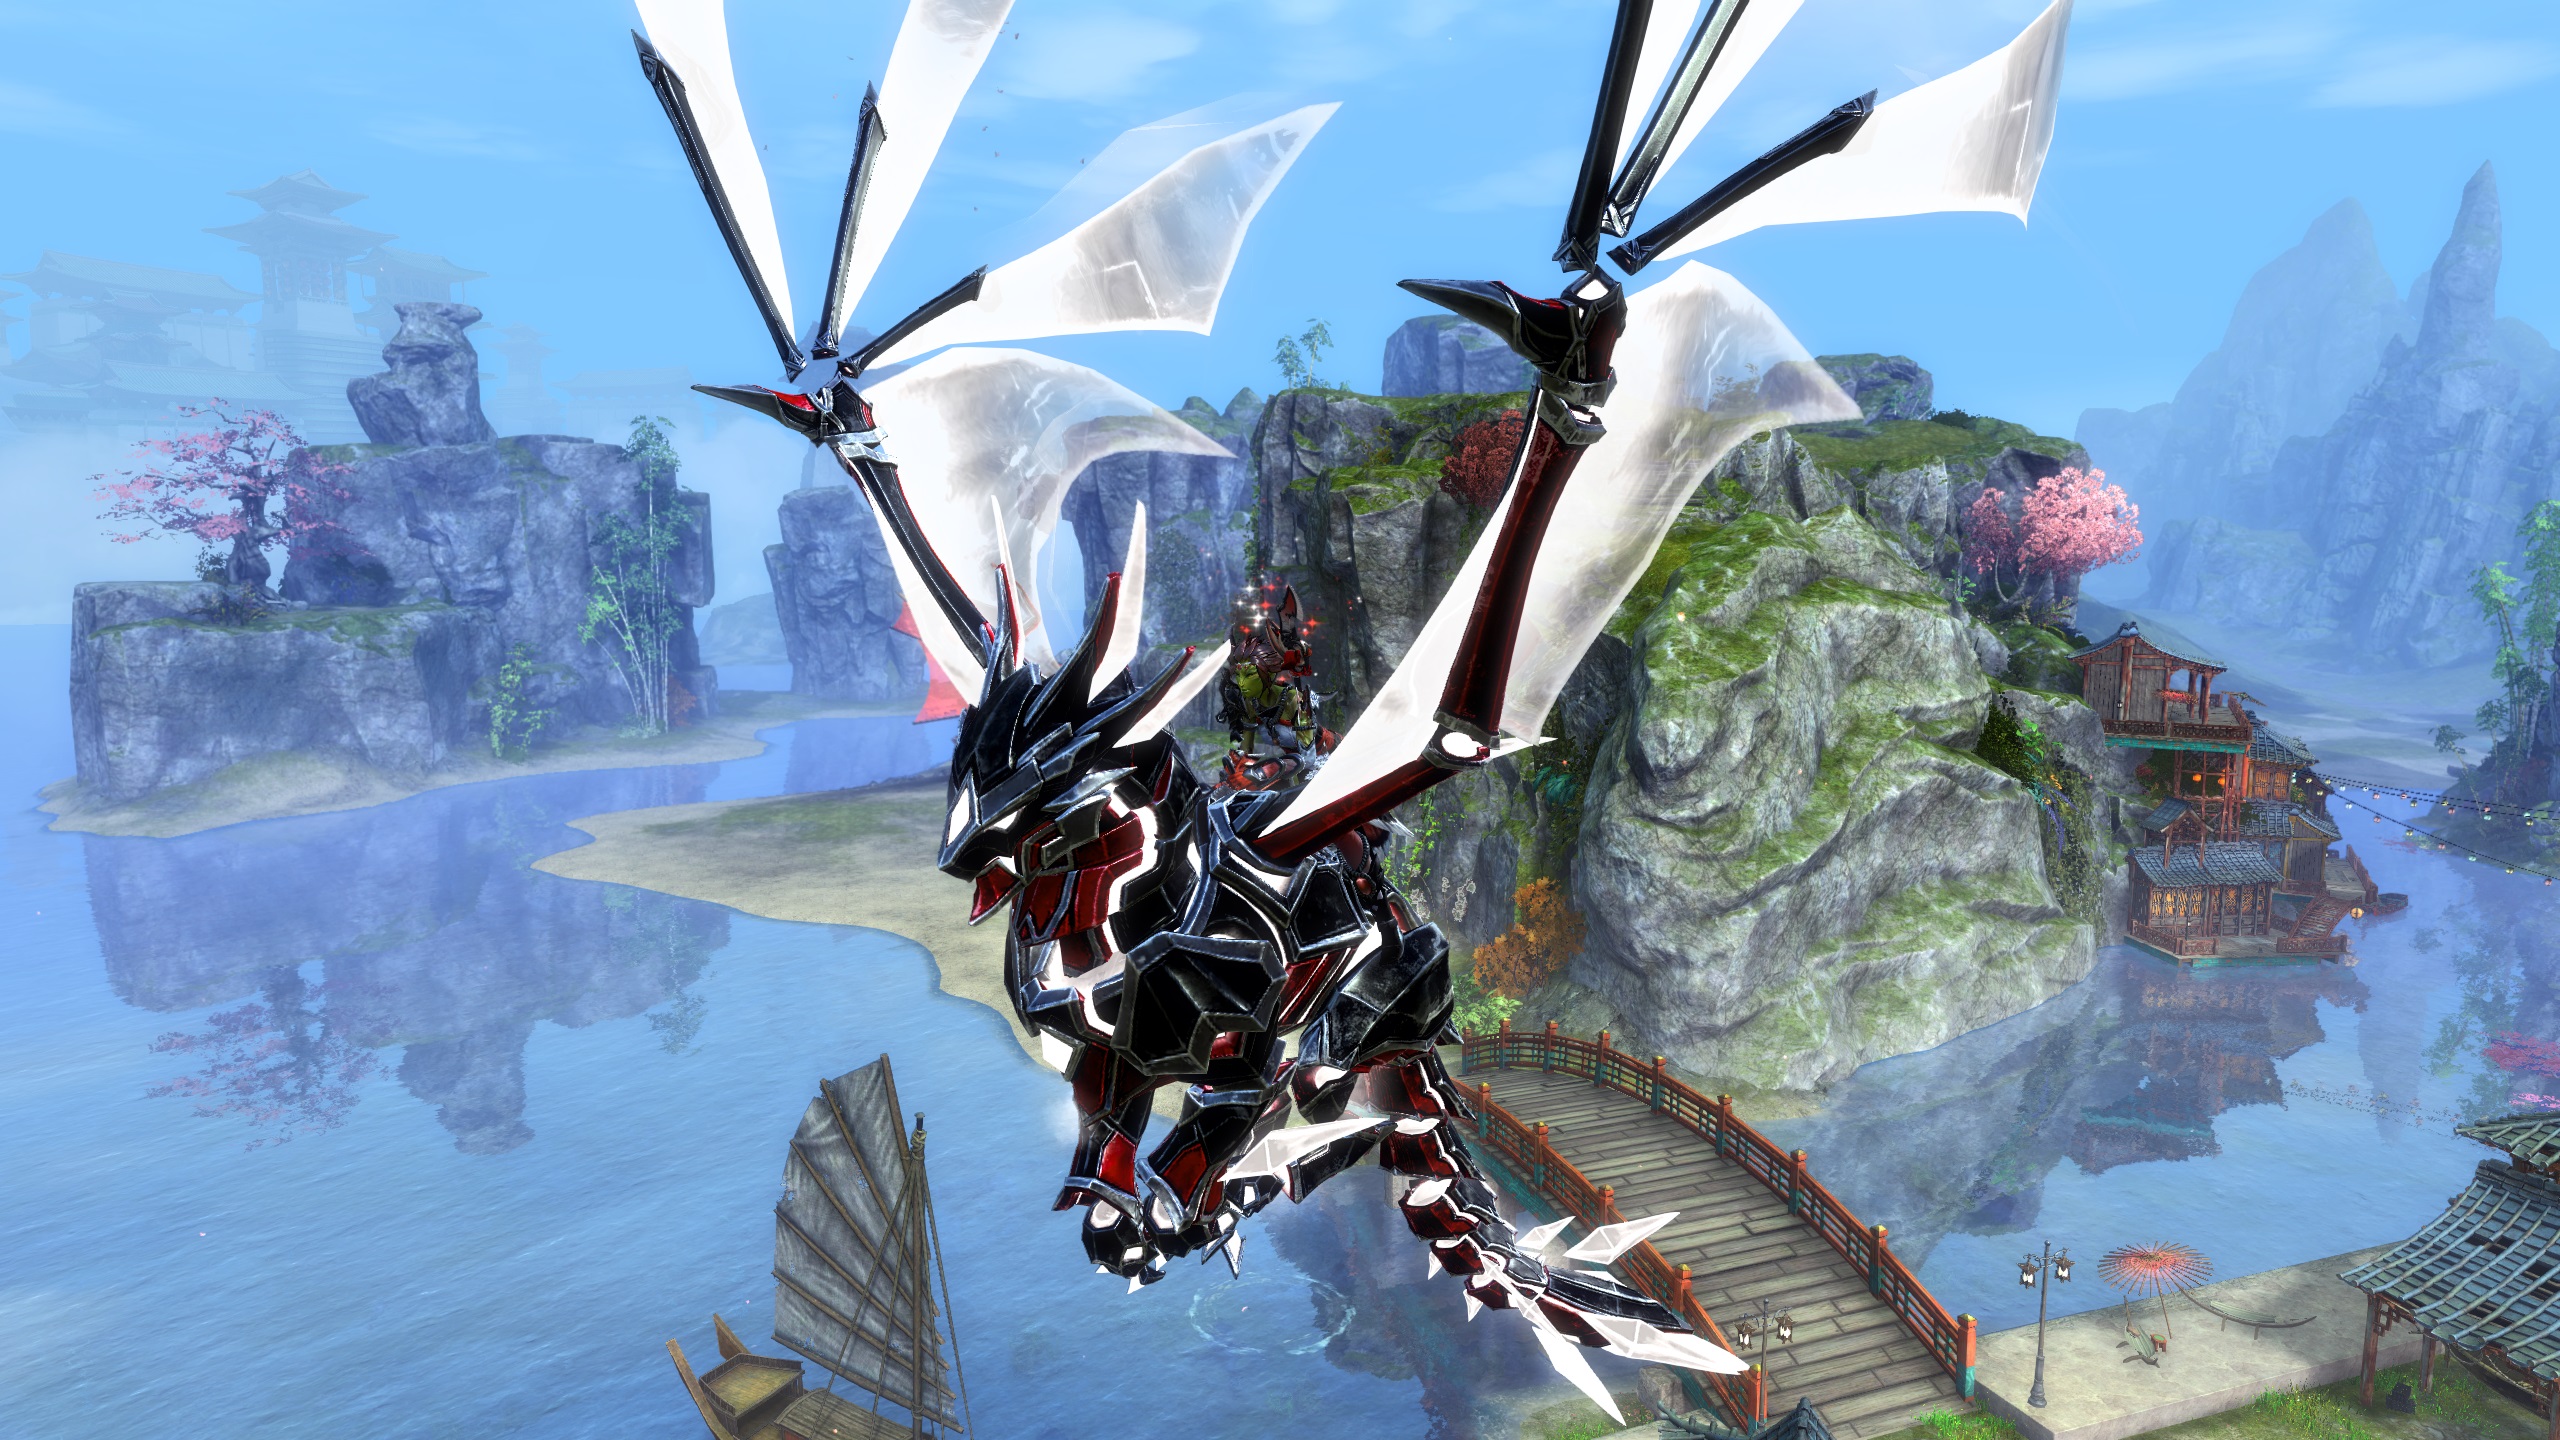  Guild Wars 2 advert pokes fun at WoW's dragonriding–'Why wait to ride a dragon?' 